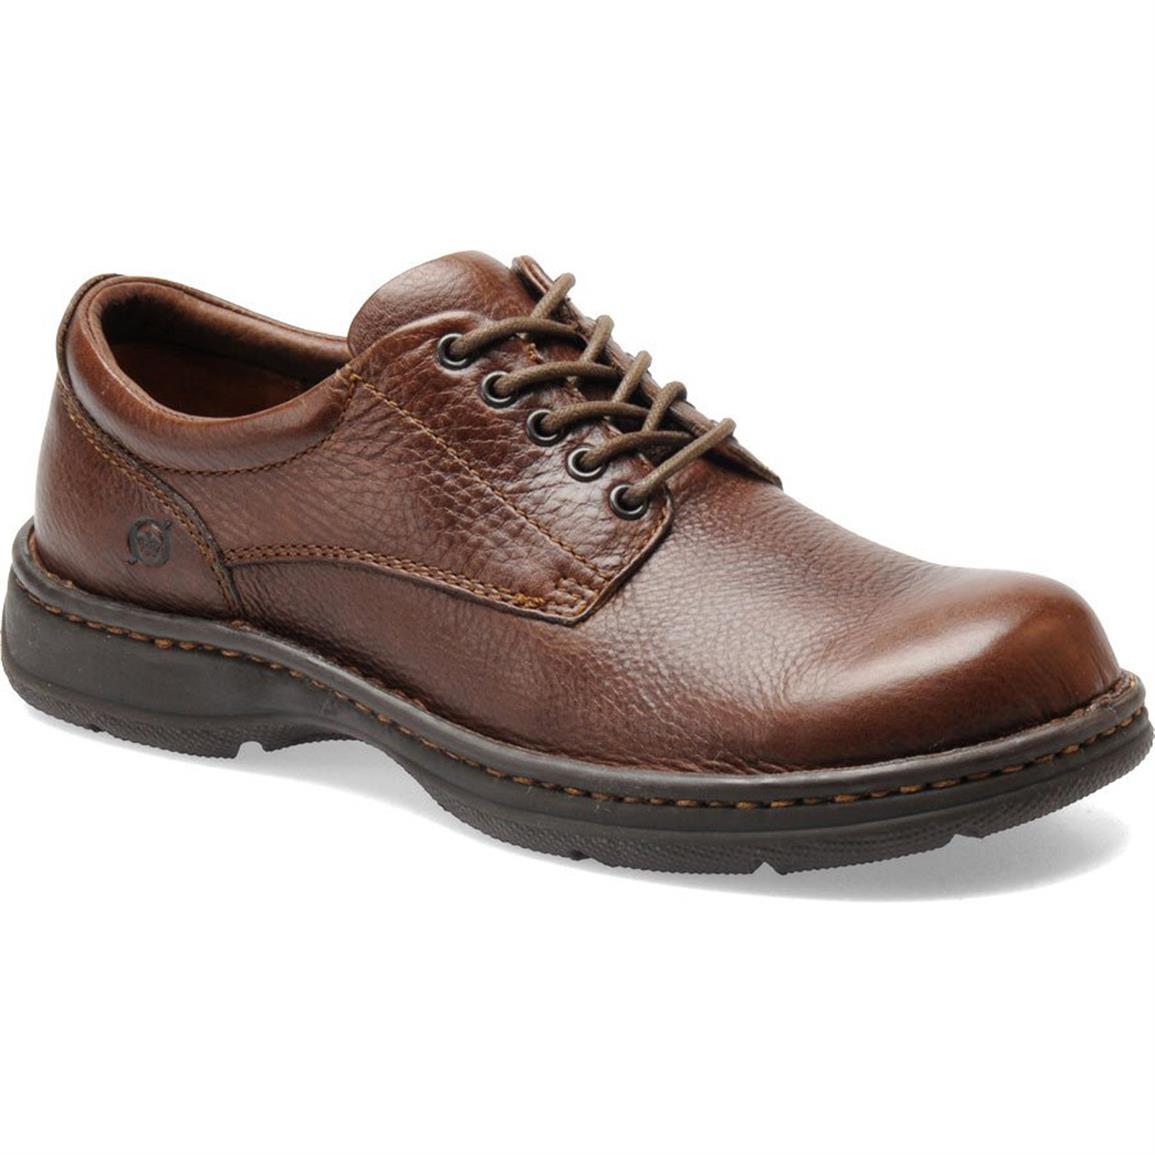 Born Hutchins II Oxford Shoes - 652976, Casual Shoes at Sportsman's Guide